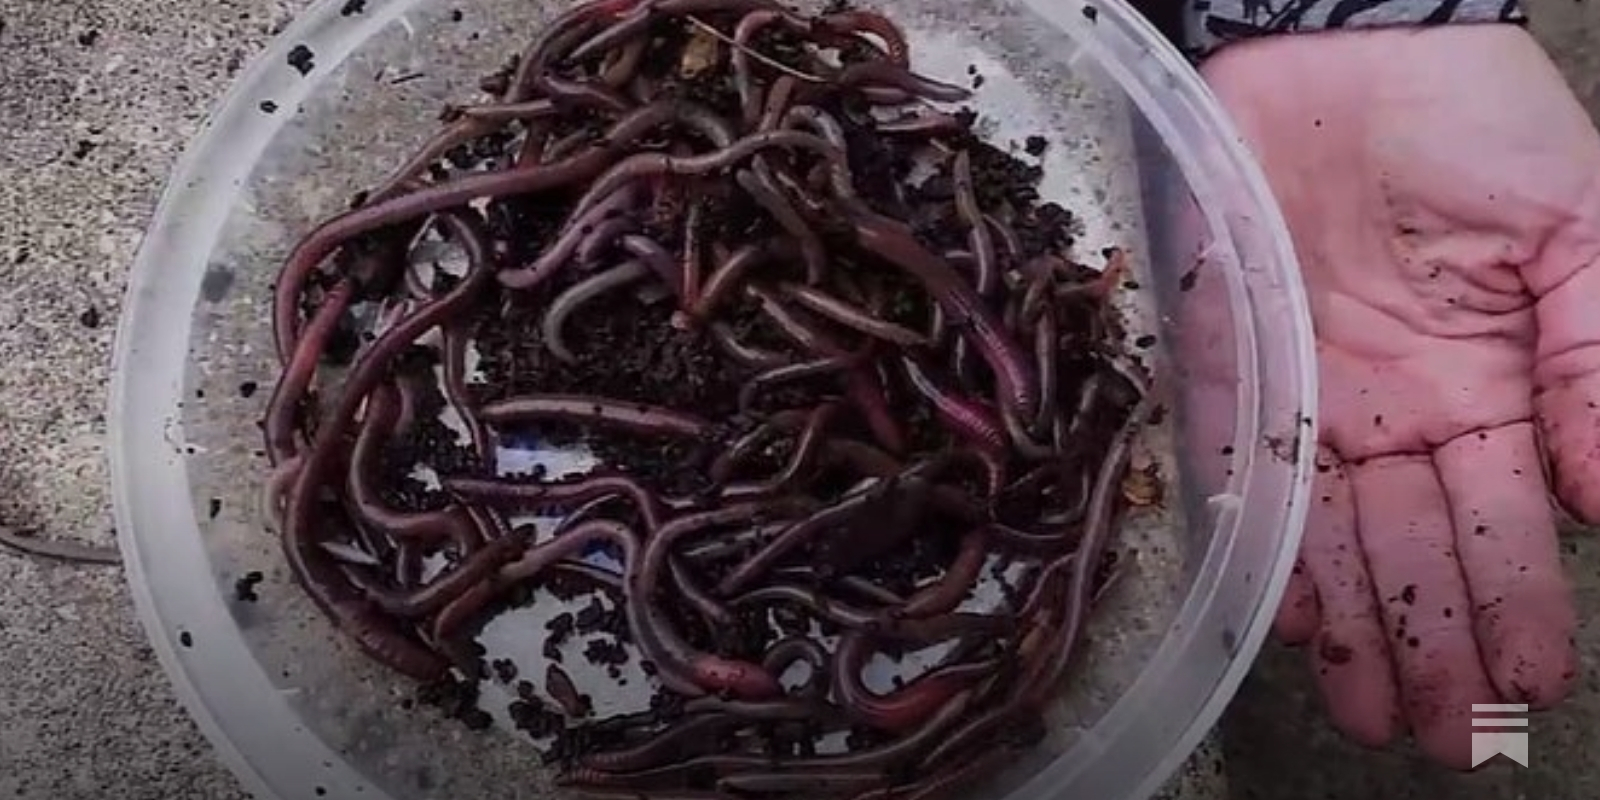 Earthworms - native and non-native, nightcrawlers and jumping